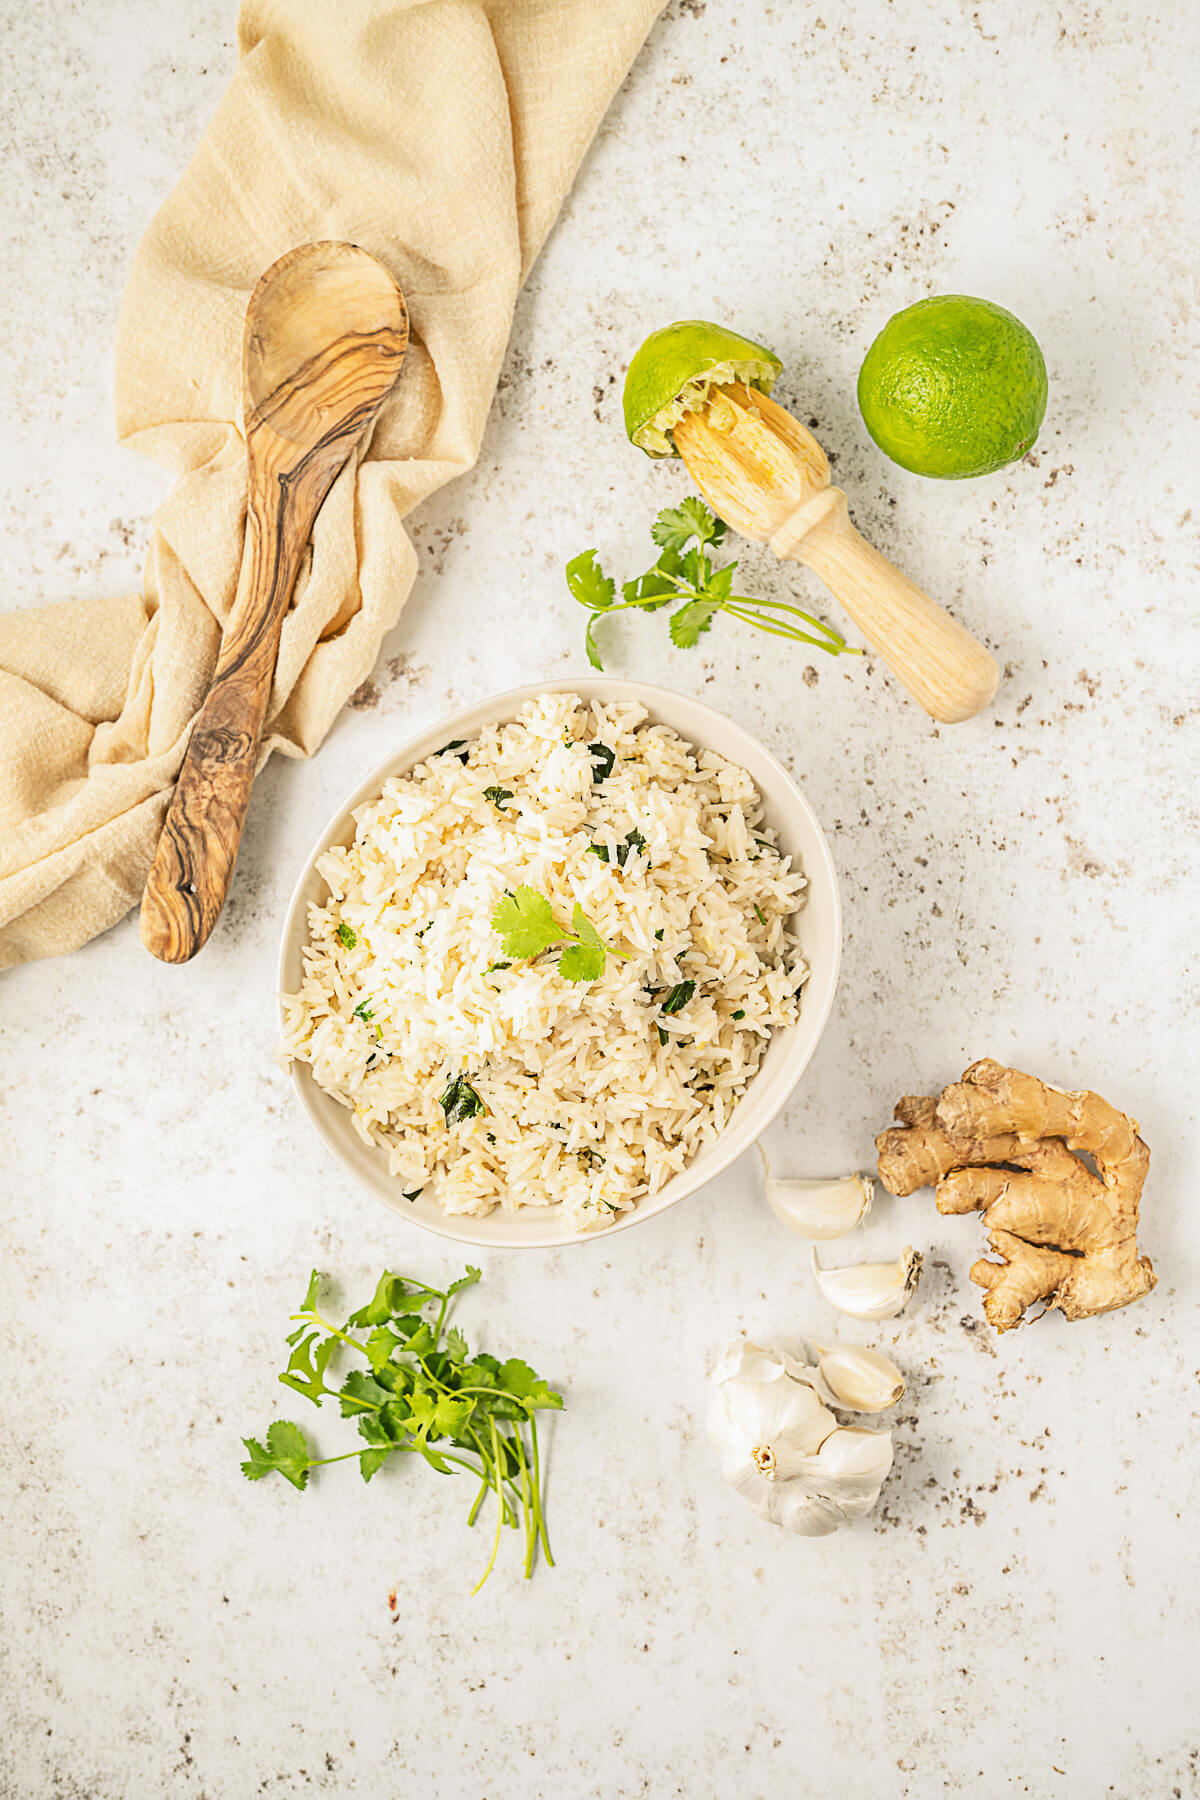 A white bowl full of Ginger Rice surrounded by fresh cilantro, limes, ginger root, and garlic cloves.